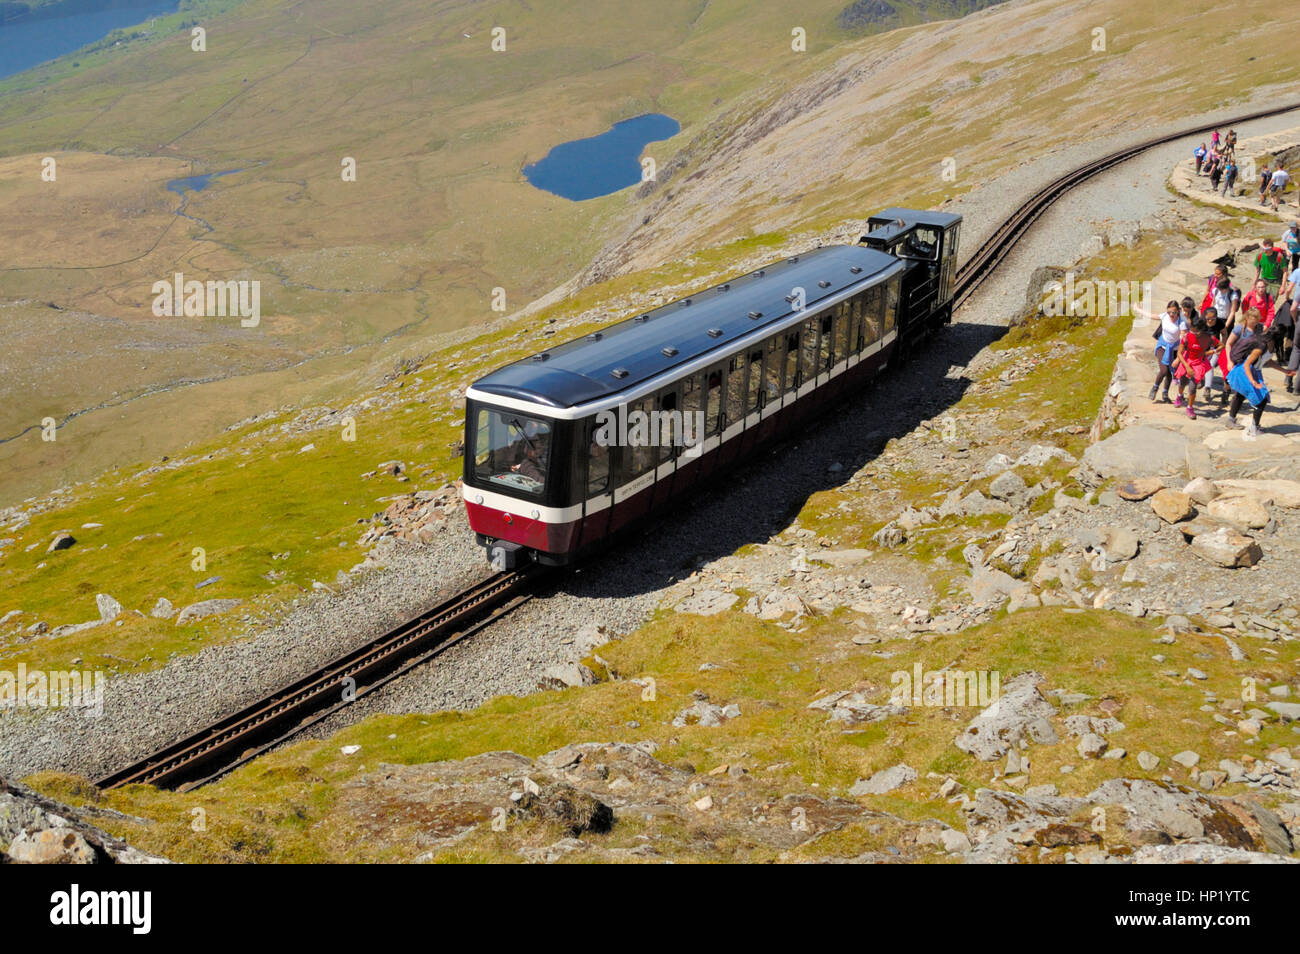 Snowdon Railway Train at about 1050m, modern coach and engine and lake below Stock Photo